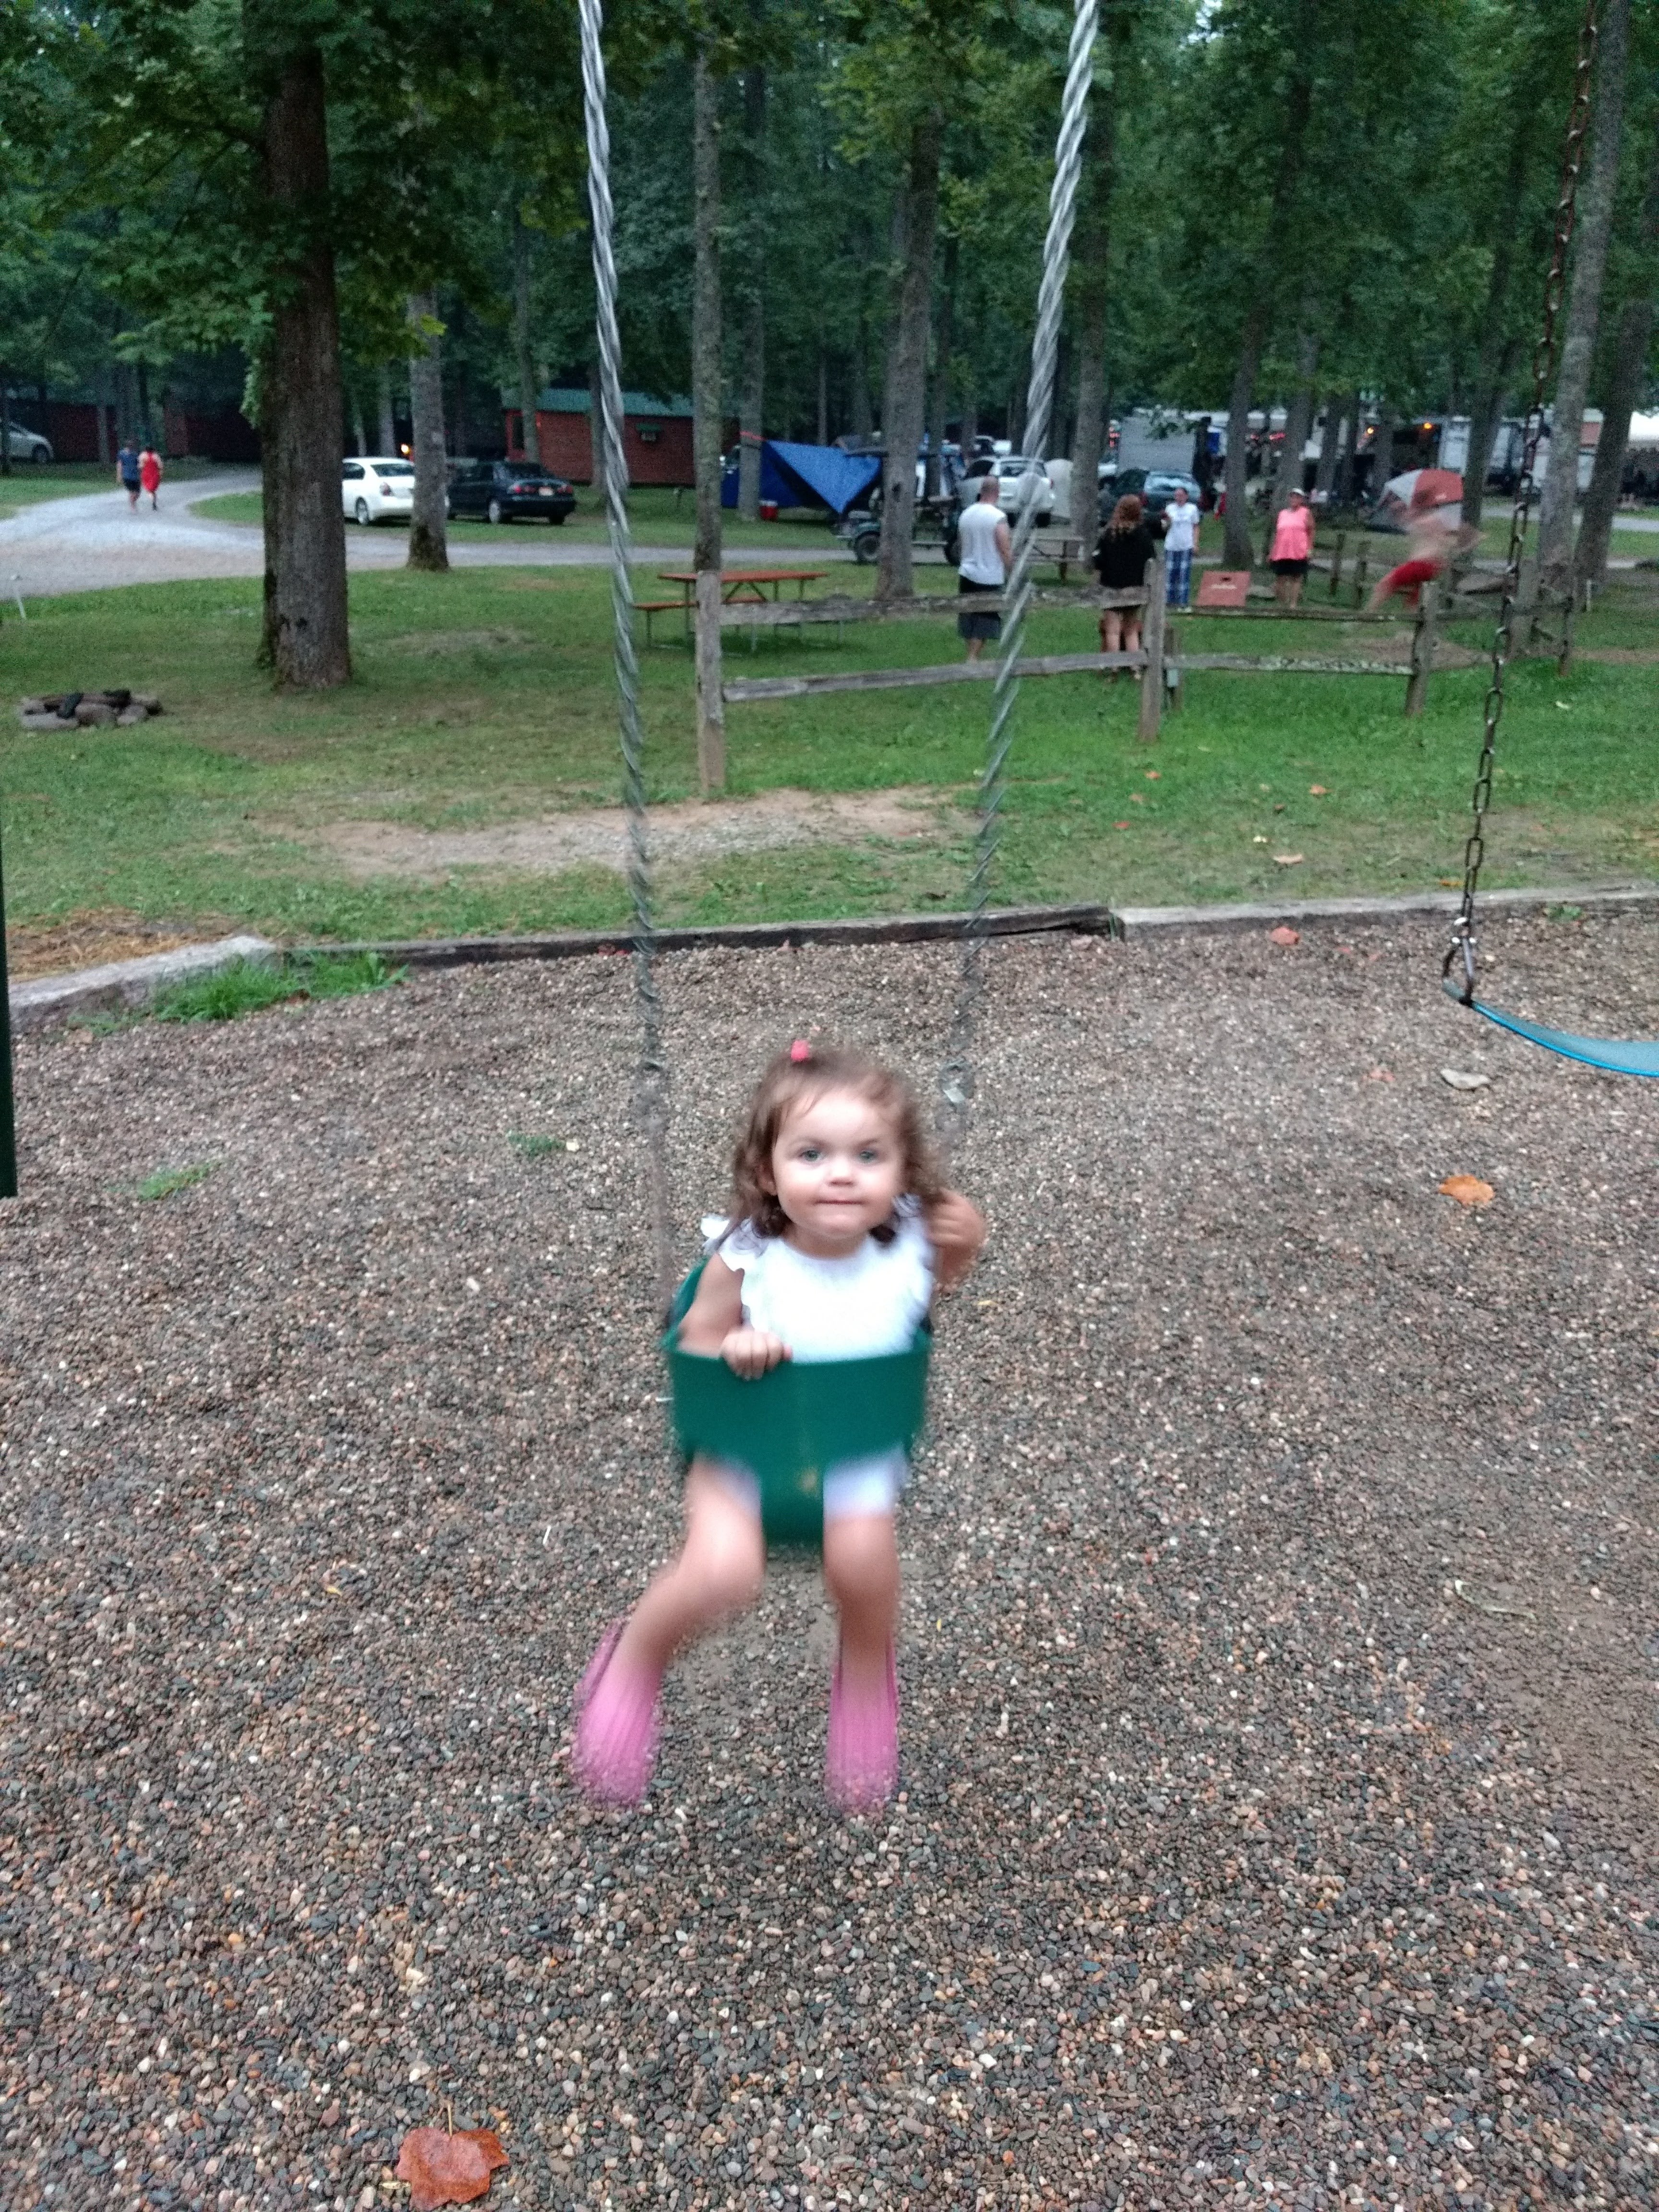 The playground had swings for babies and big kids.